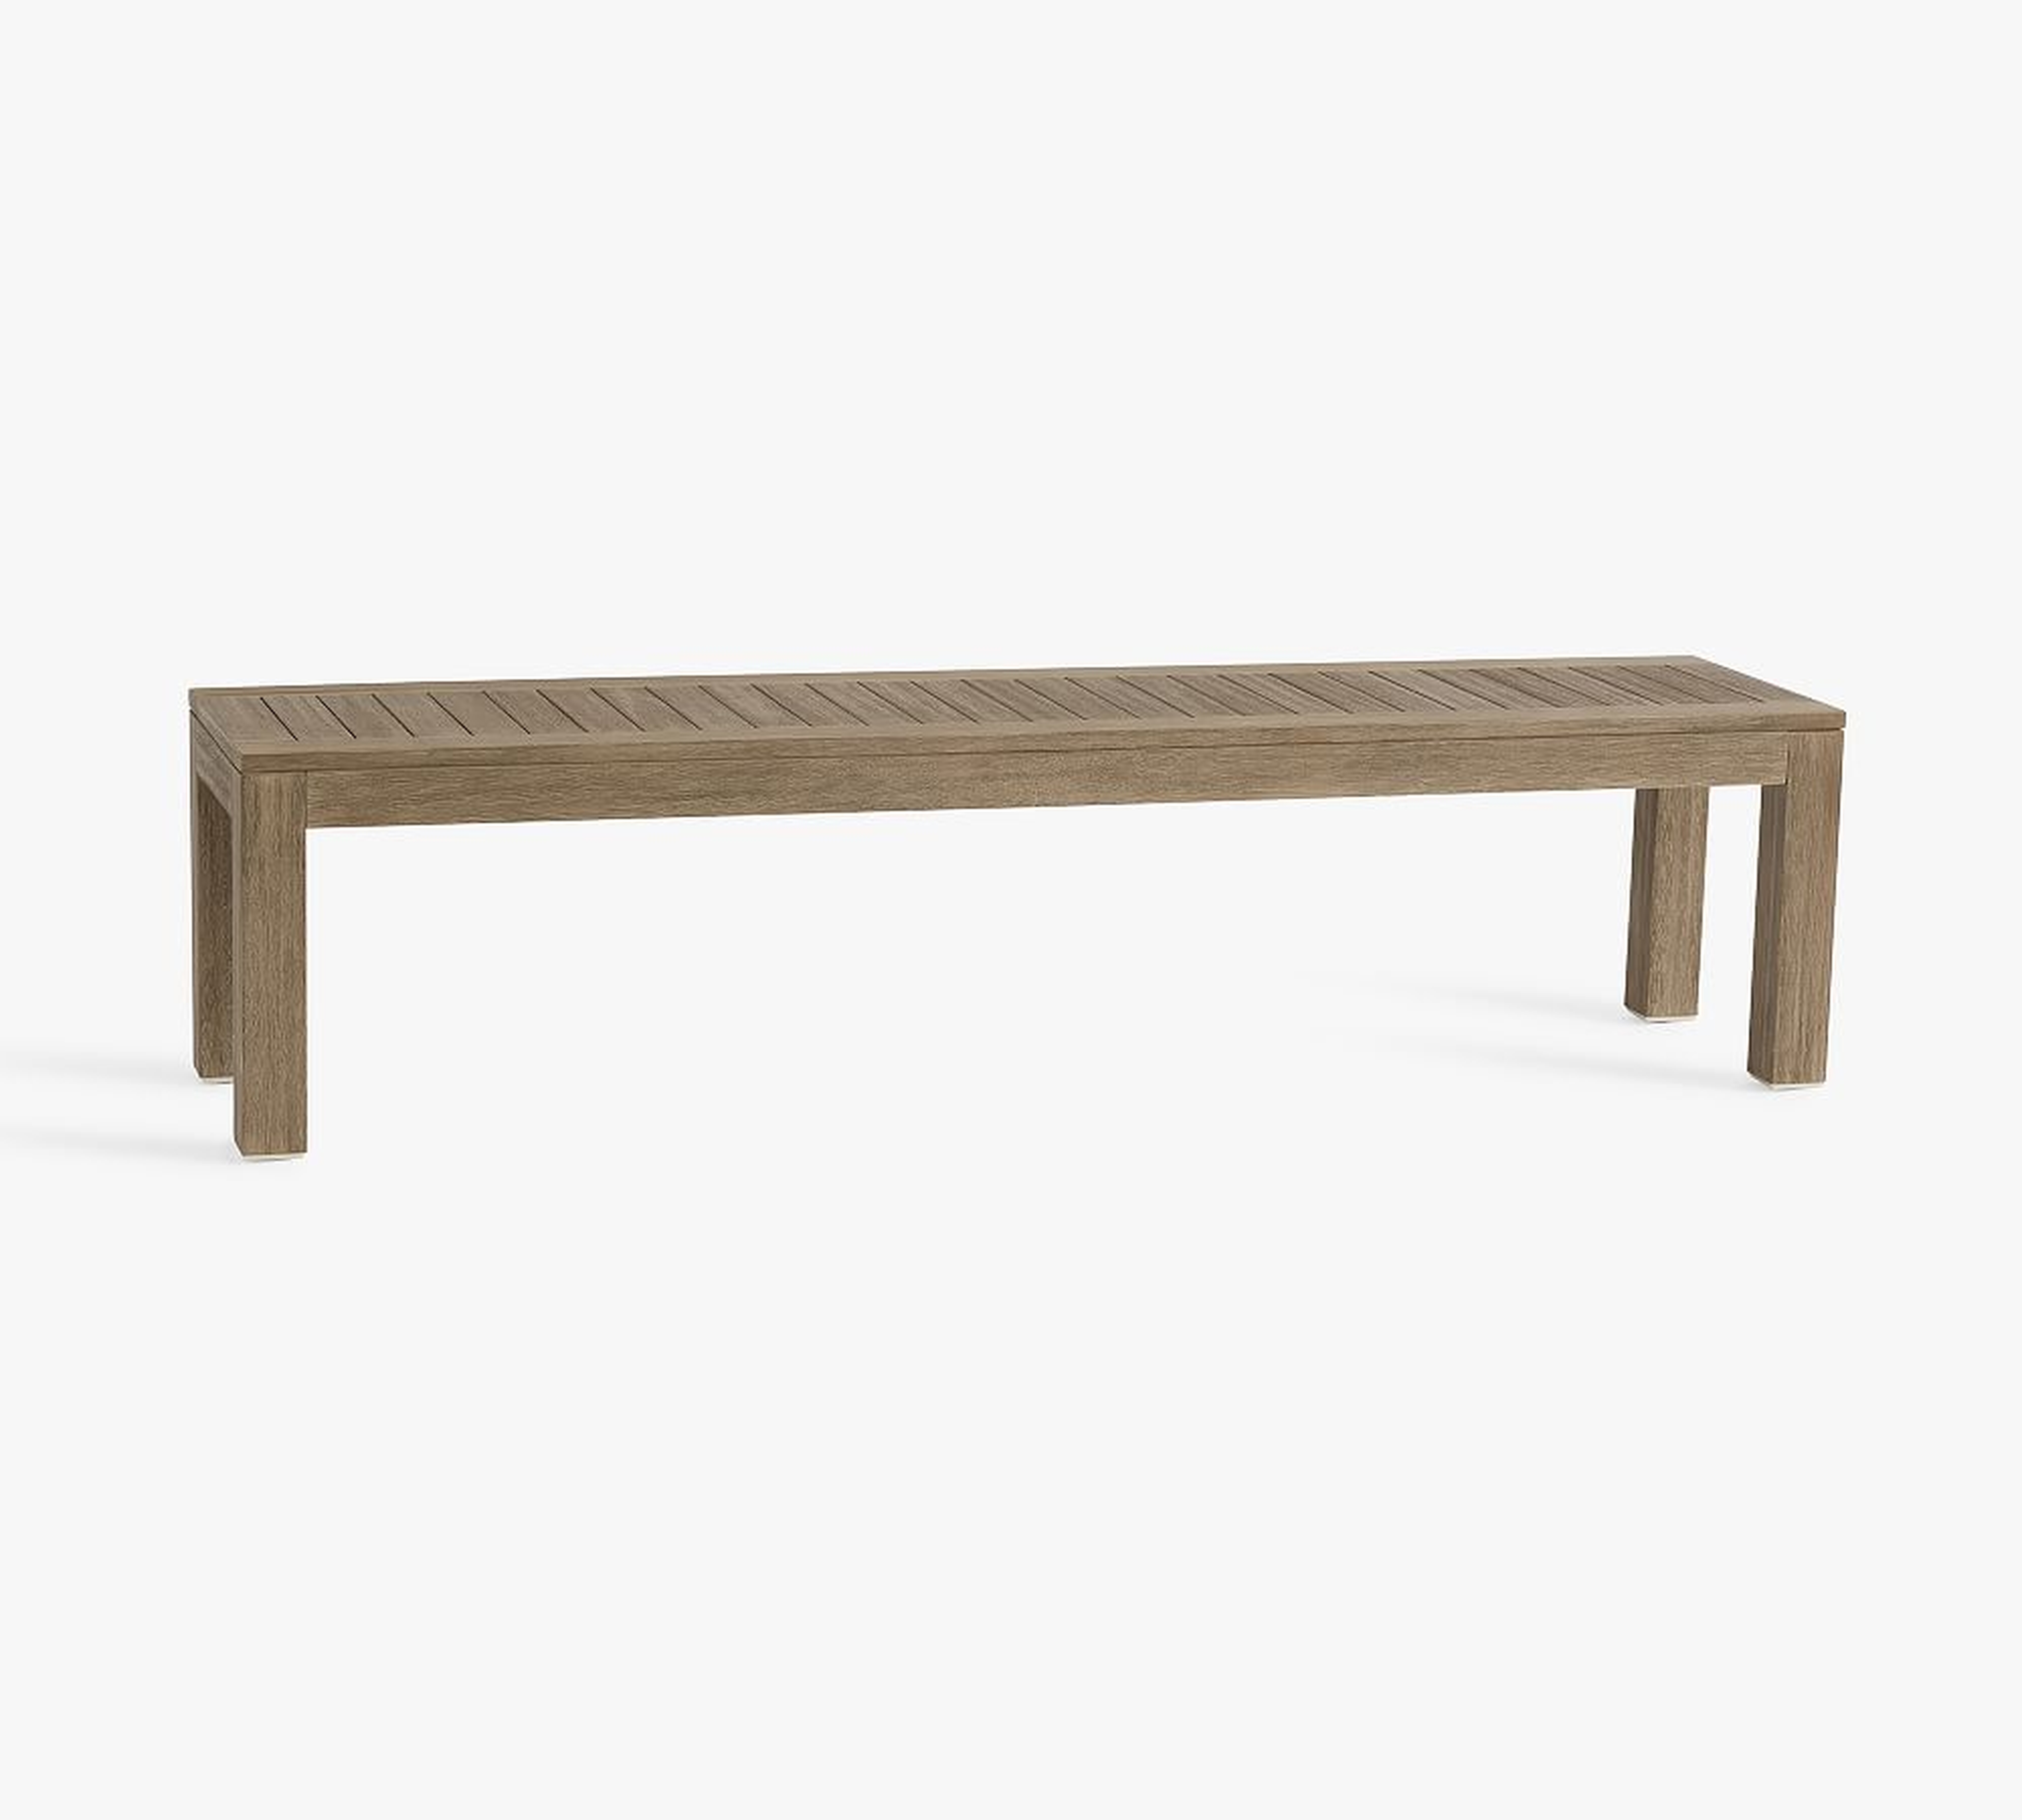 Indio 73" Dining Bench Frame, Weathered Gray - Pottery Barn